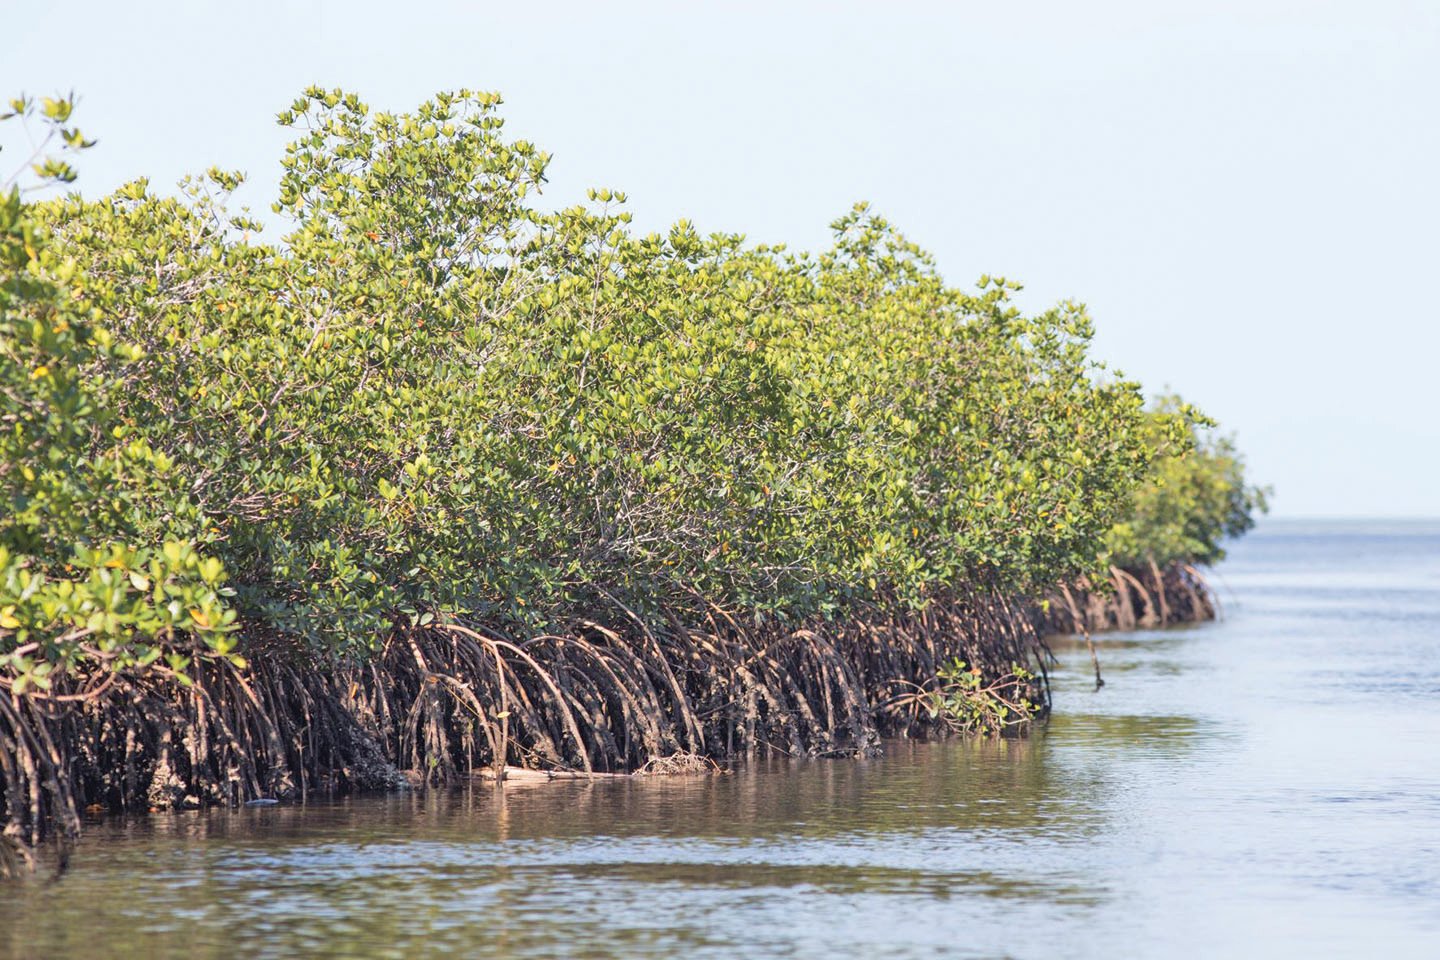 Photo of mangrove trees in the Gulf.